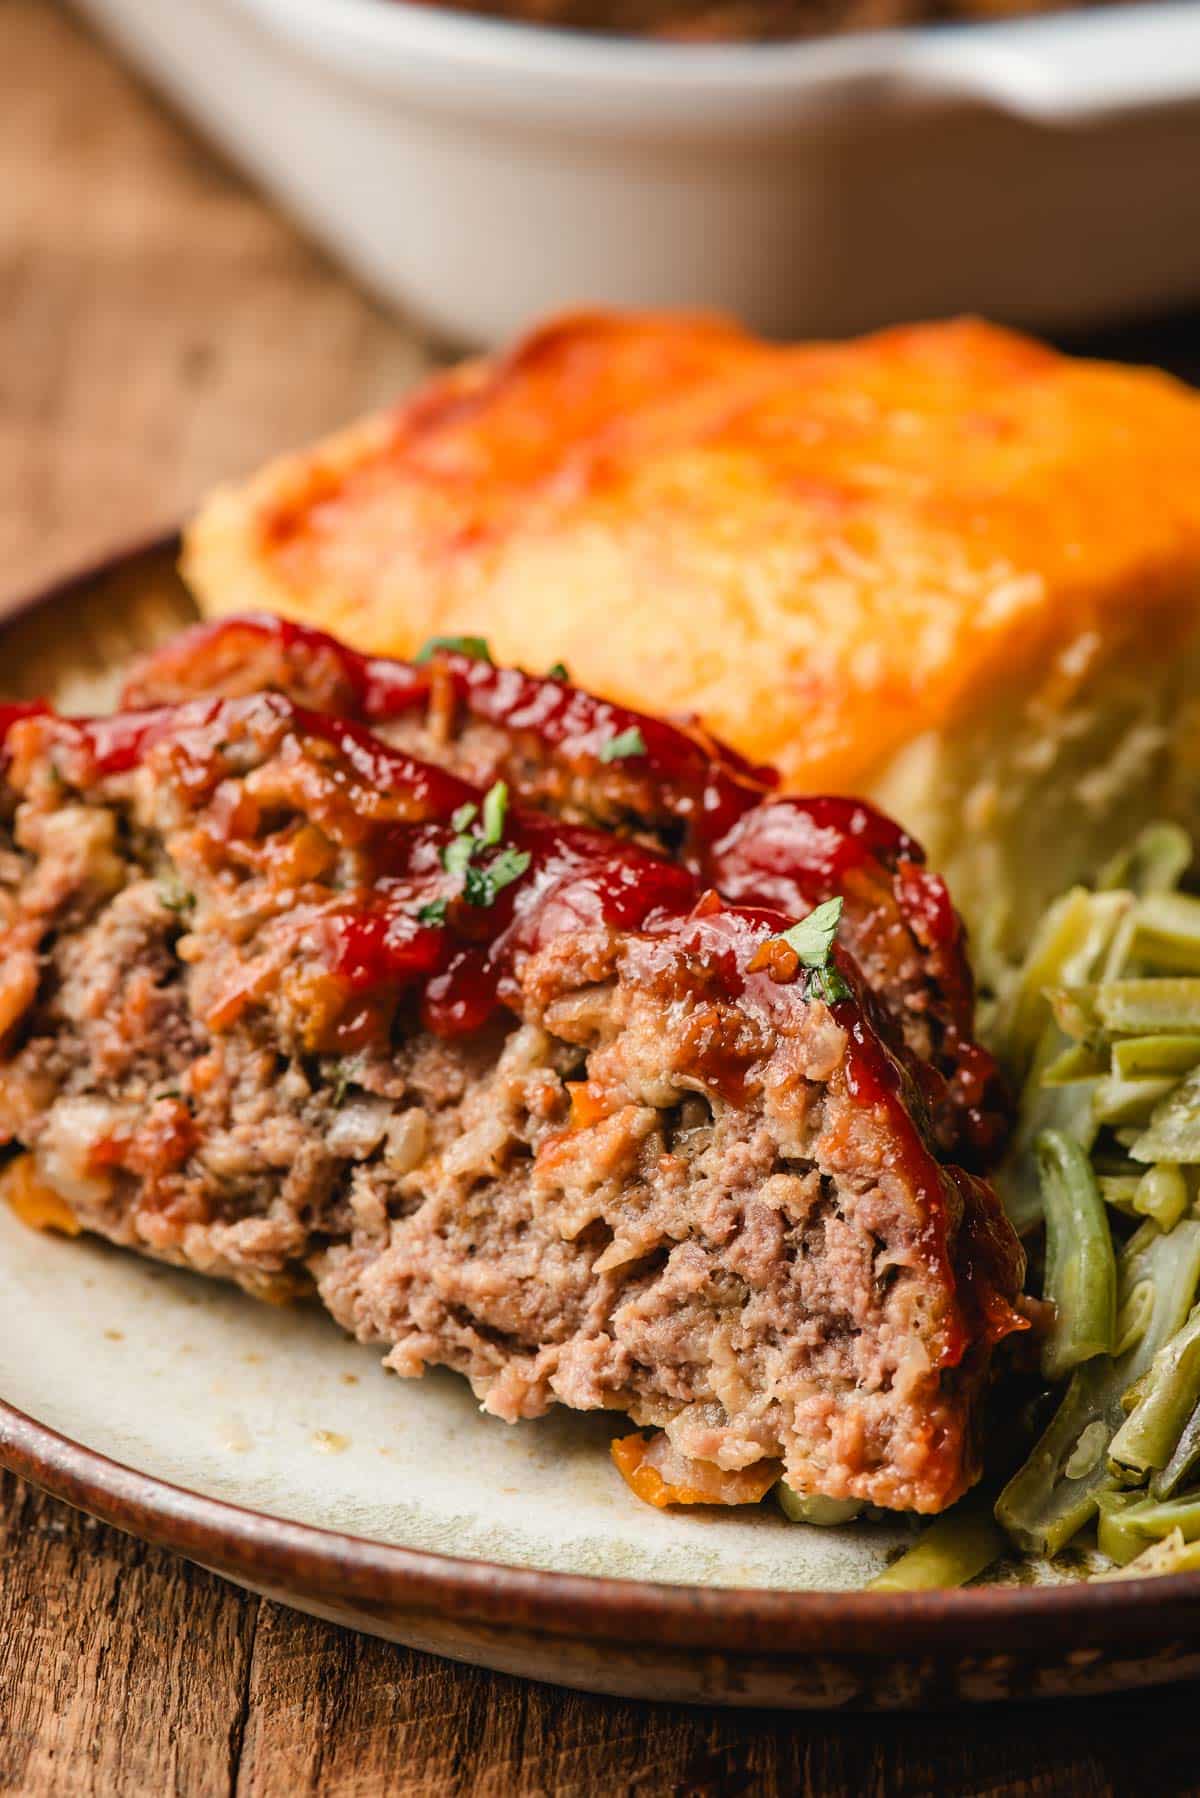 Slices of ketchup glazed meatloaf with cheesy potatoes and green beans on a plate.